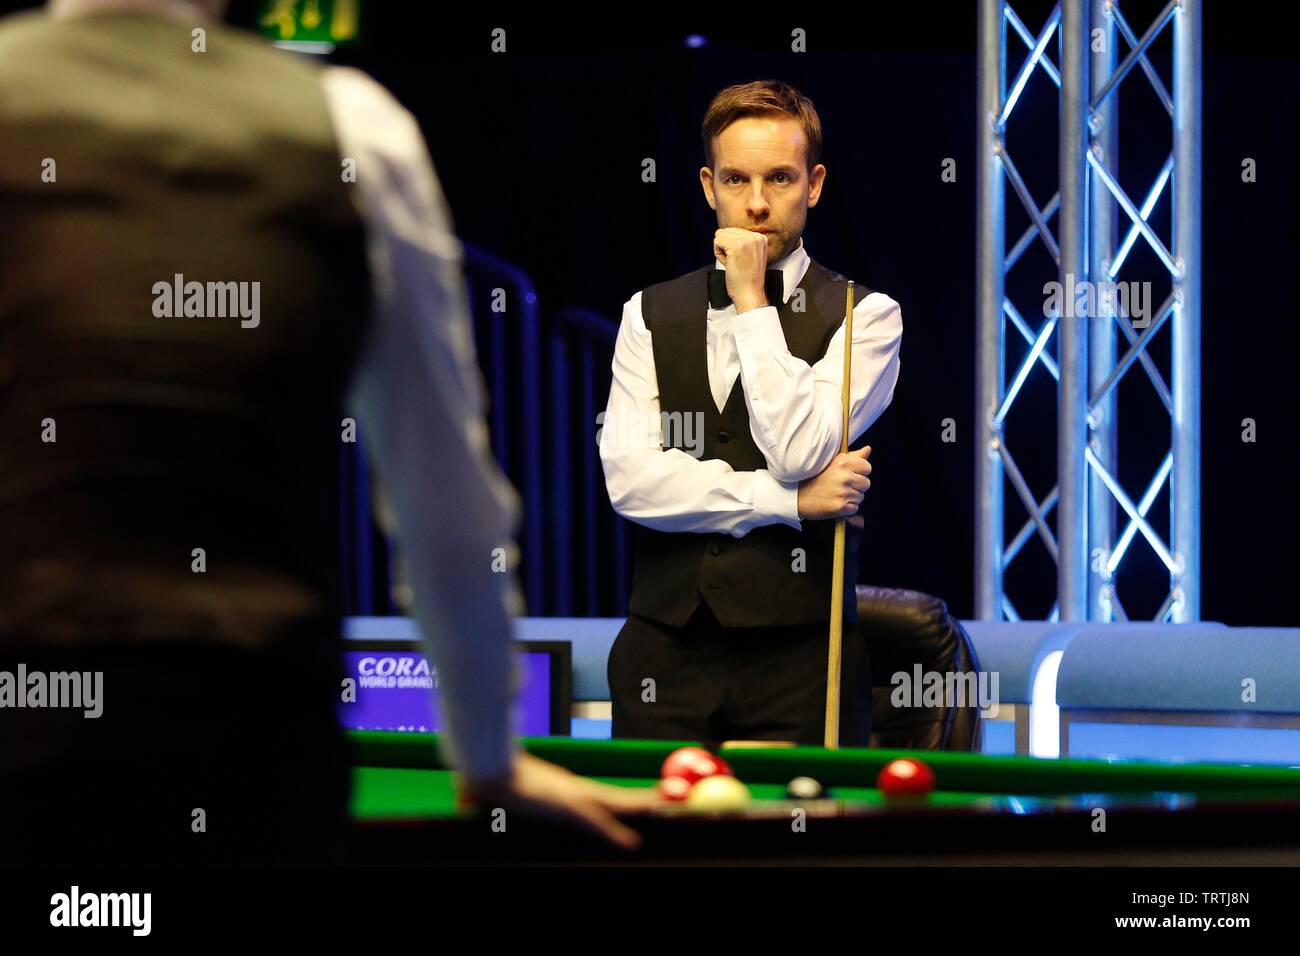 Ali Carter from Chelmsford watching Judd Trump from Bristol, playing in the finals of the Coral World Grand Prix snooker championships, held in Stock Photo